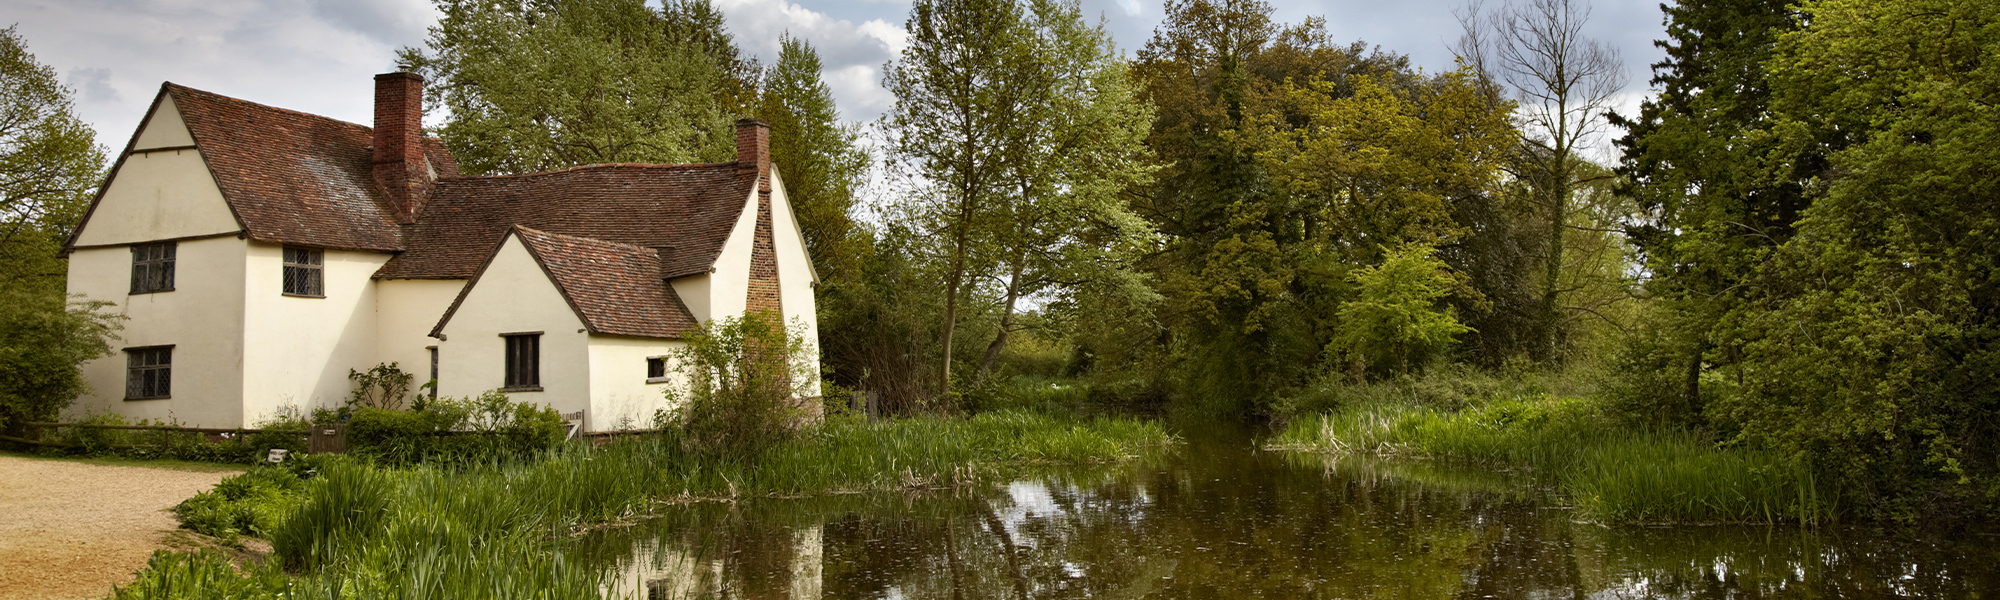 tourhub | Just Go Holidays | Stately Suffolk & Constable Country 